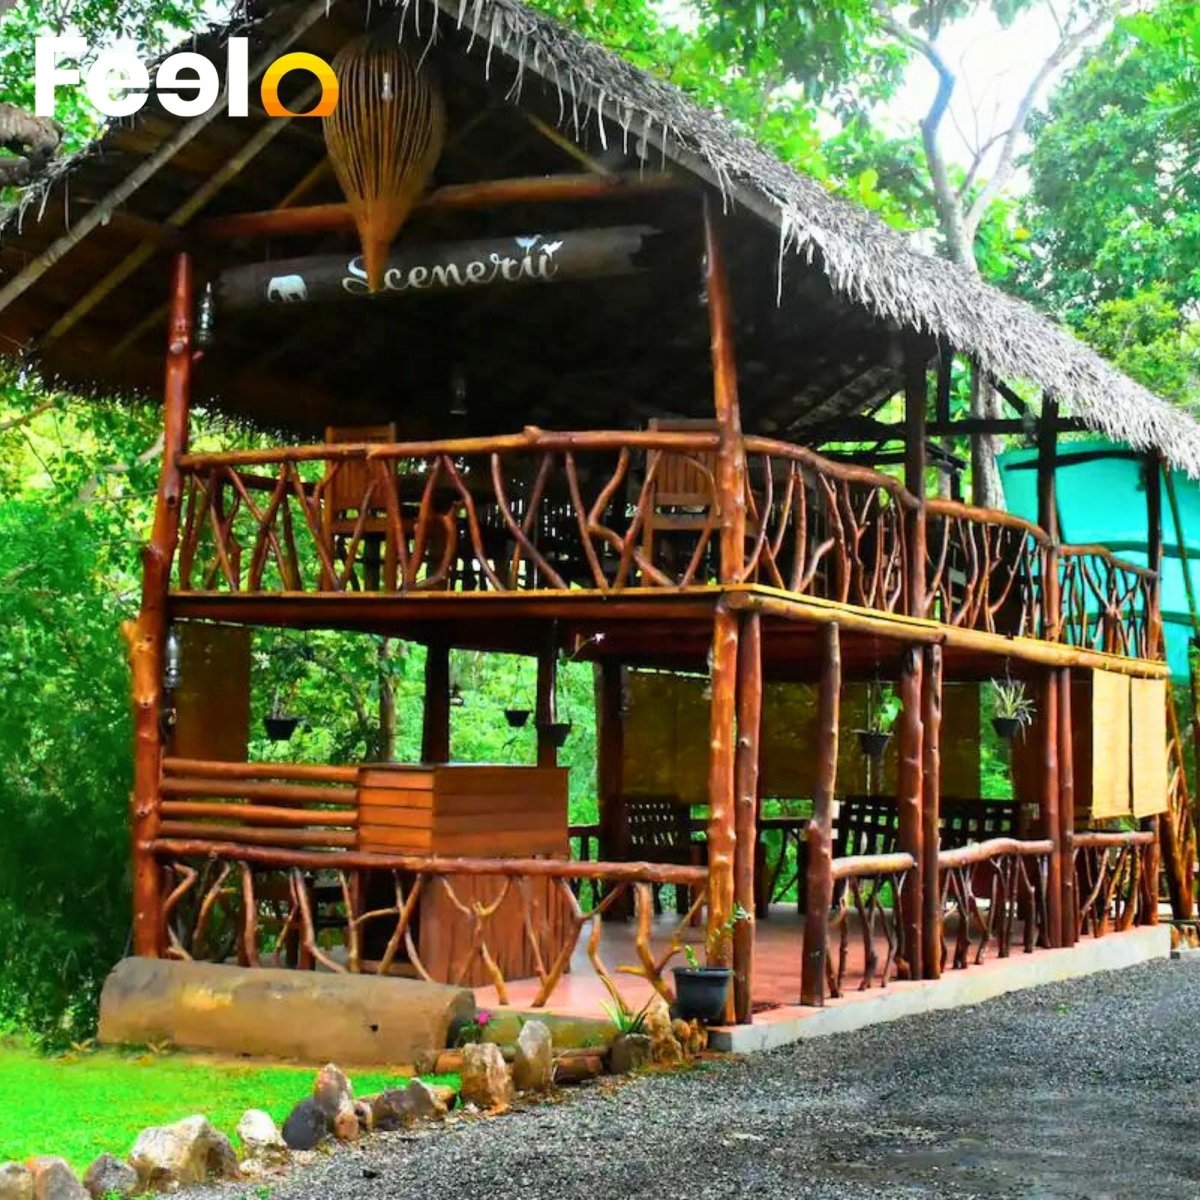 1x Night or 2x Nights stay in luxurious chalets by the Walawe River - Freedom Eco Resort, Udawalawa | Feelo